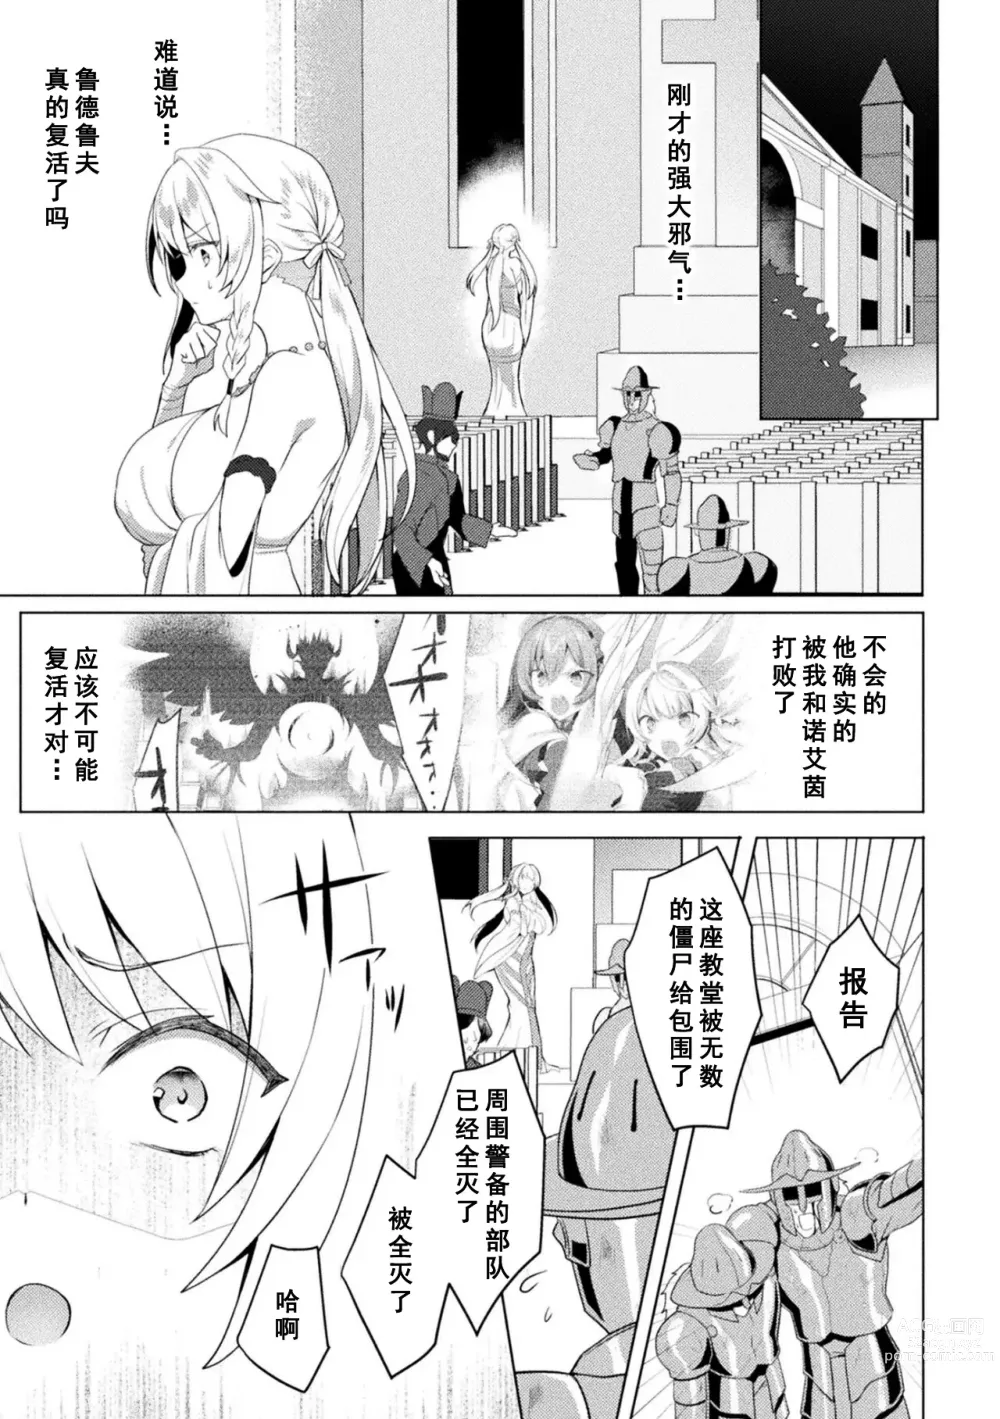 Page 9 of manga Edens Ritter Ch. 1 Gaiden - Innan no Mikohime Cecily Hen THE COMIC Ch. 1